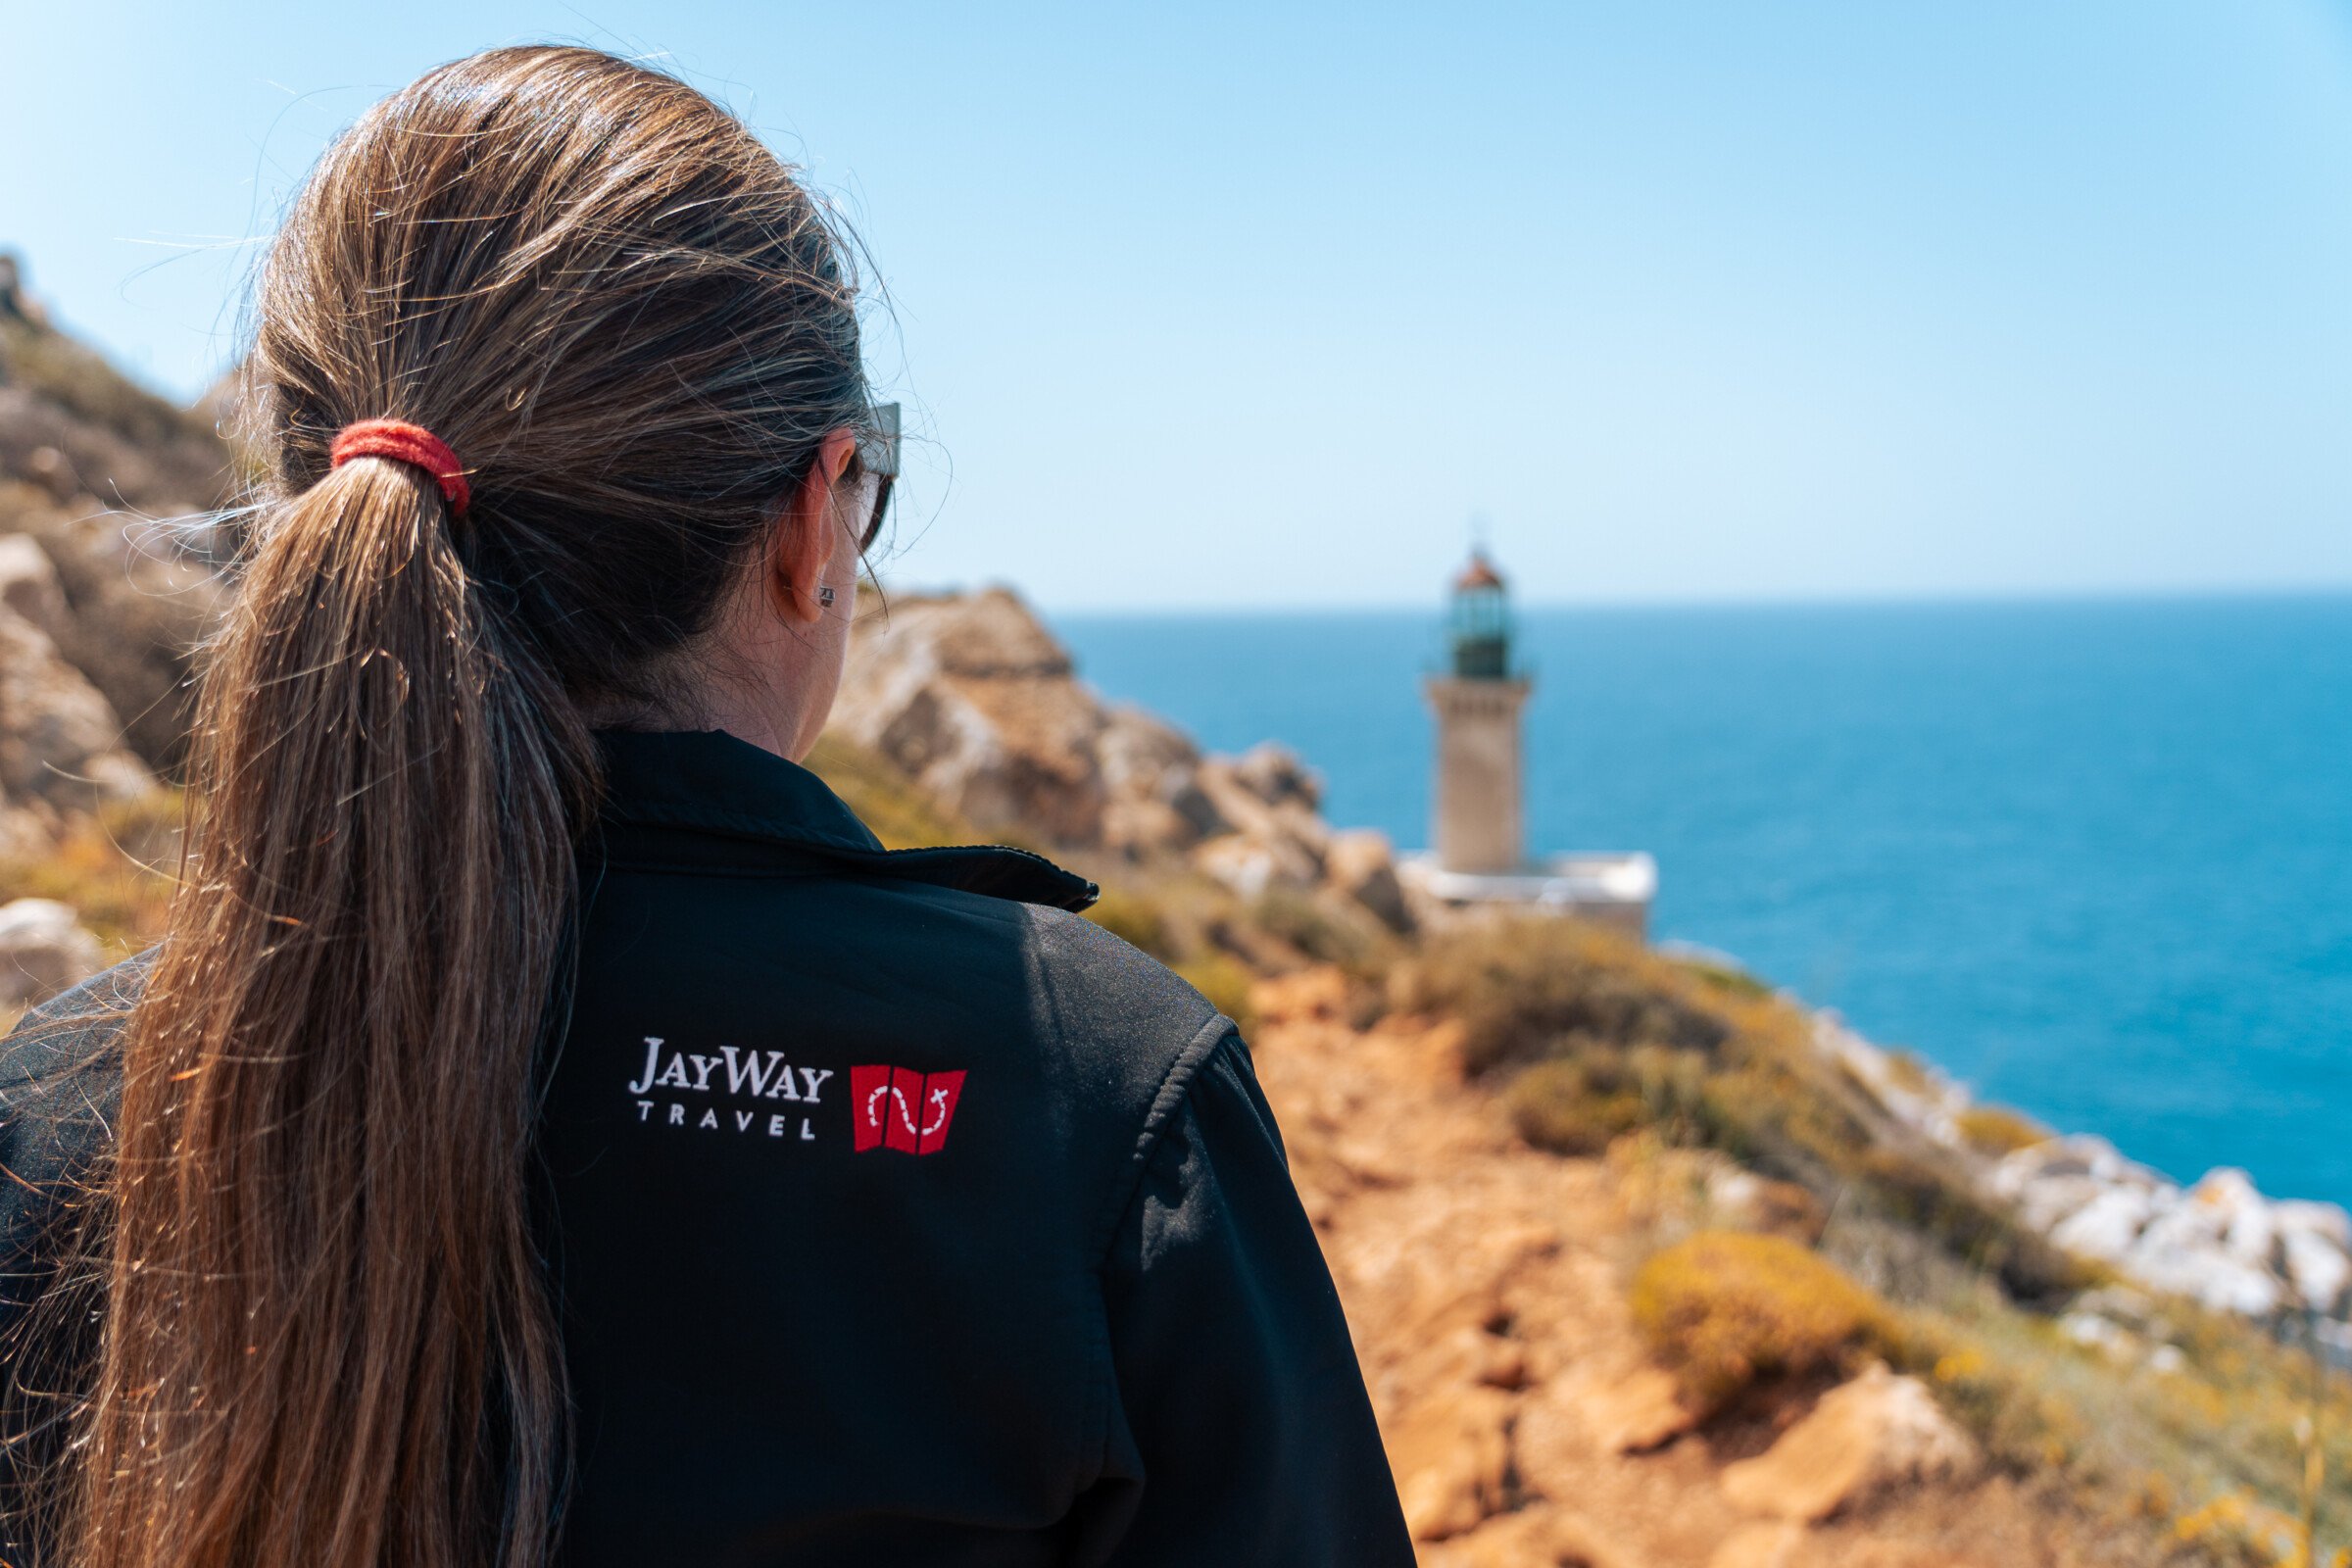 This image shows a woman with her back turned to the camera looking at the lighthouse of Cape Tainaro in the background. She's wearing a jacket with the JayWay Travel logo. 